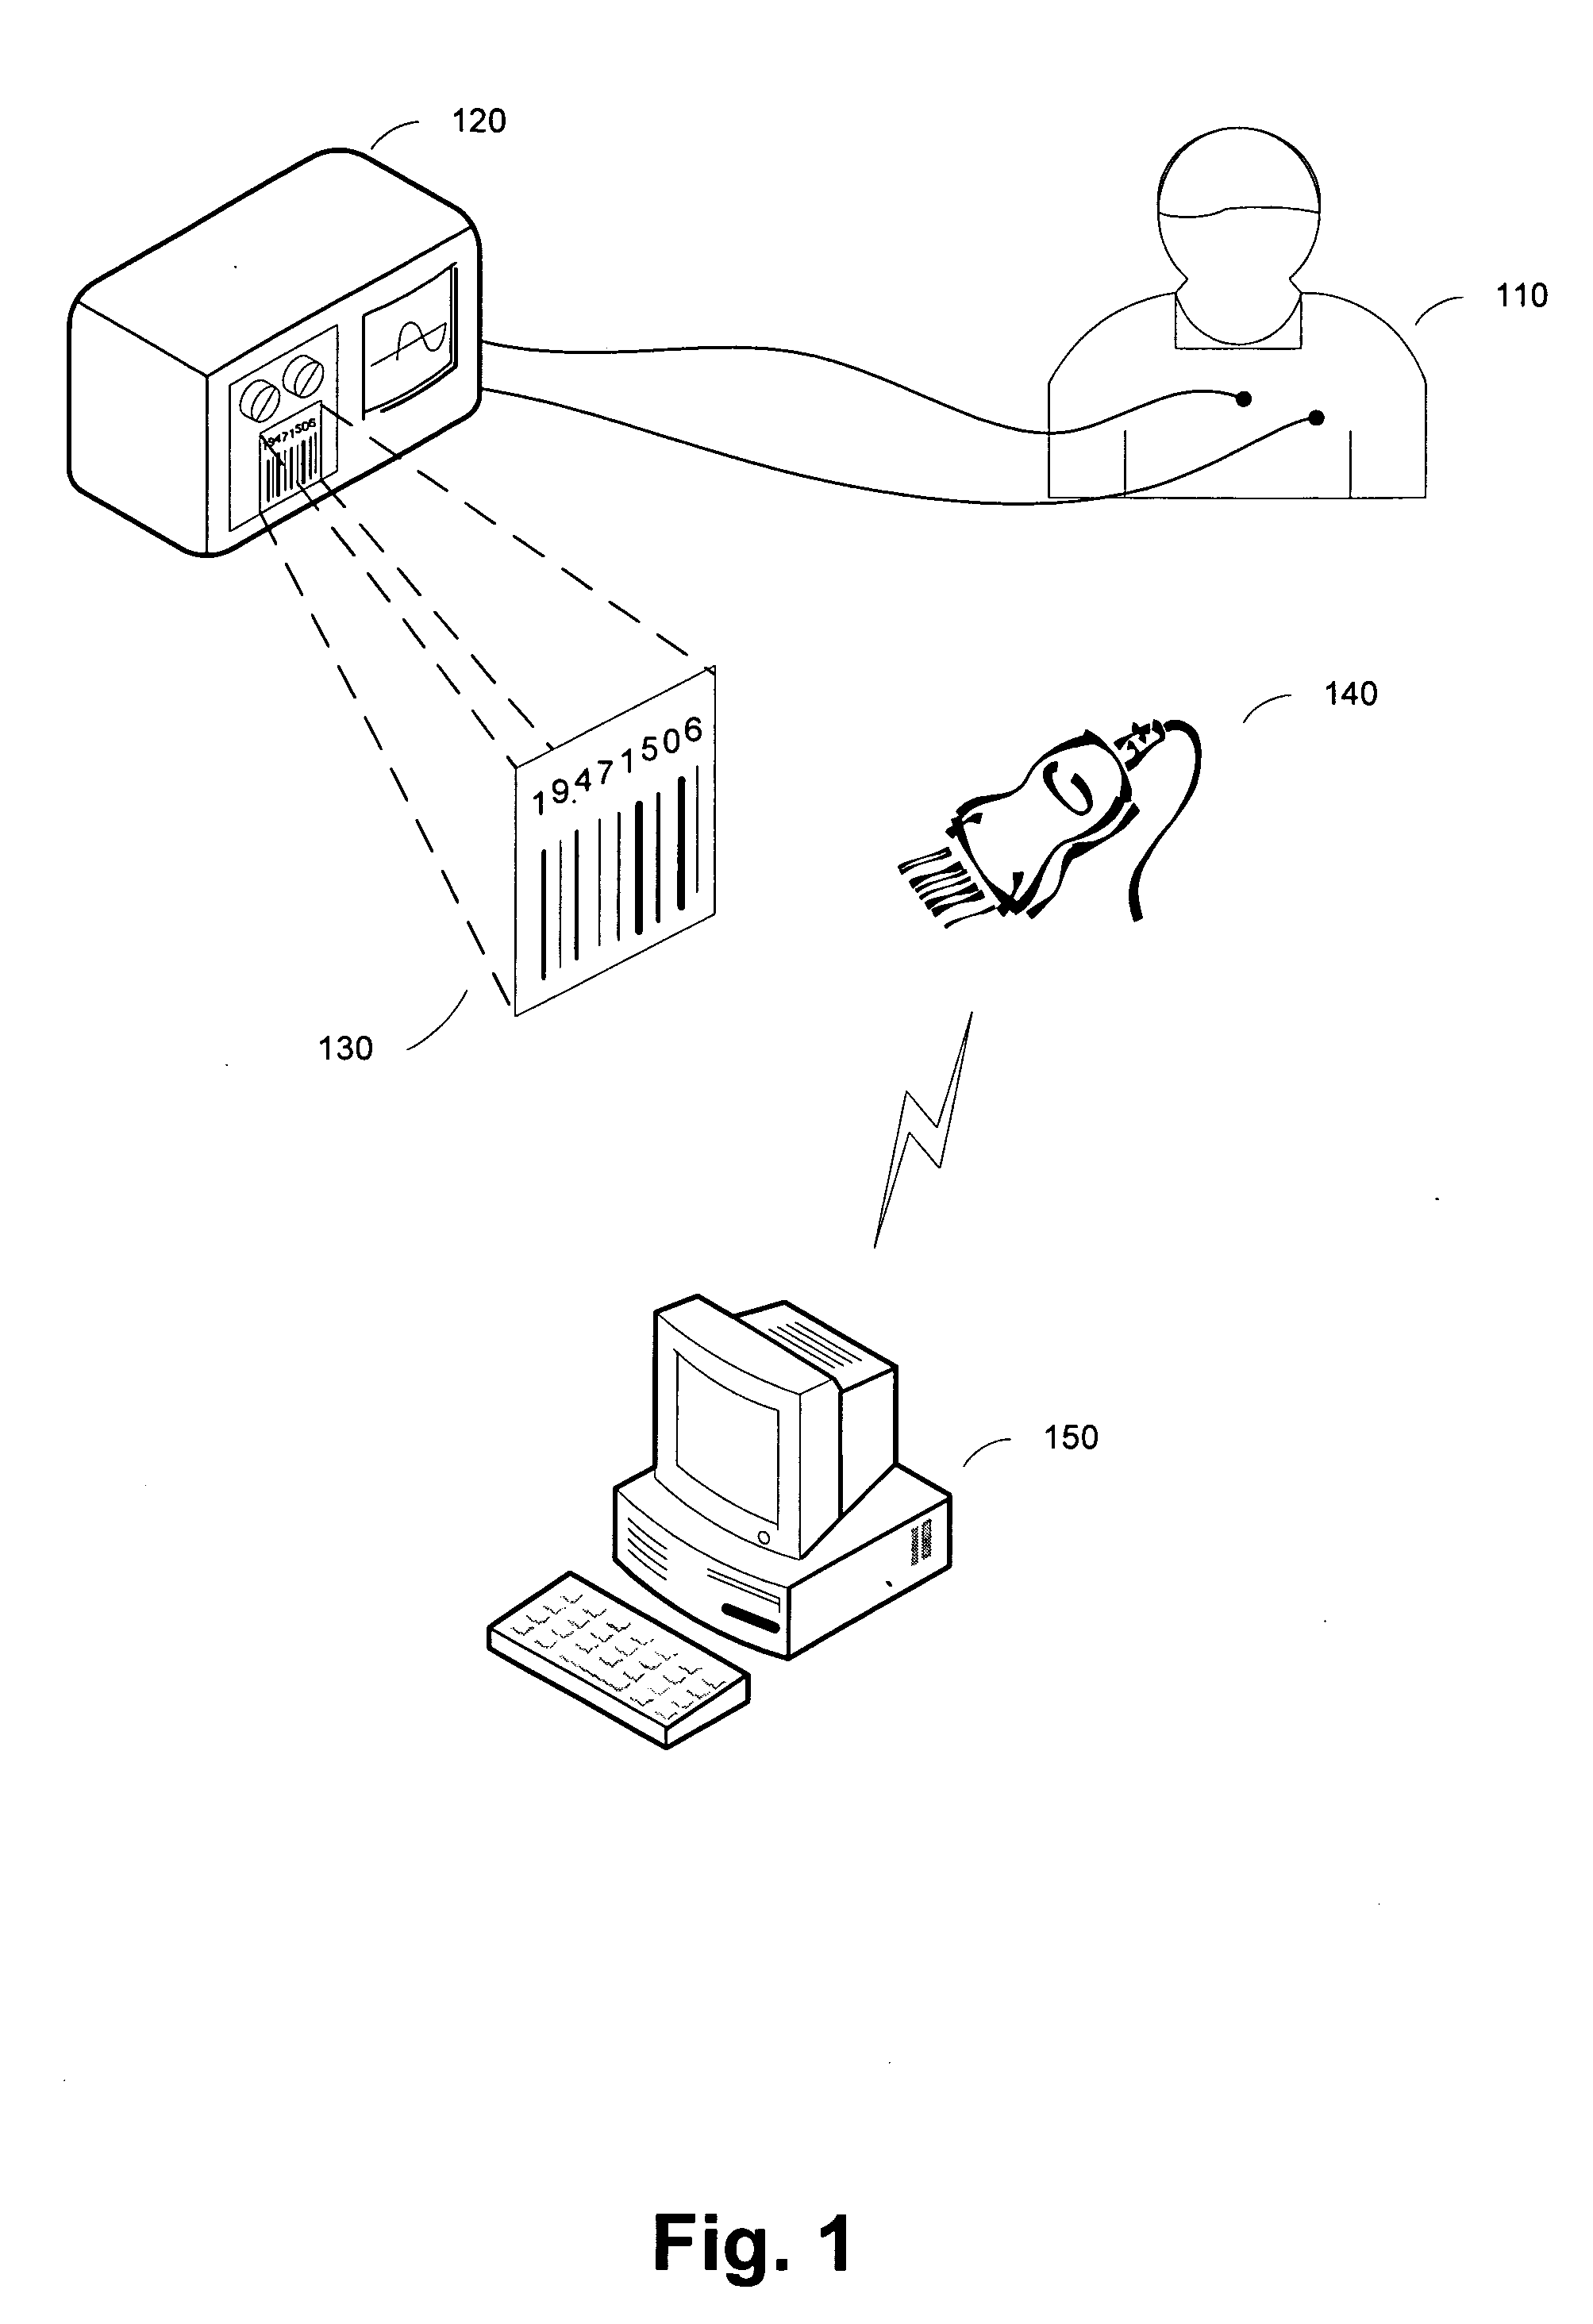 Systems and methods for processing measurement data